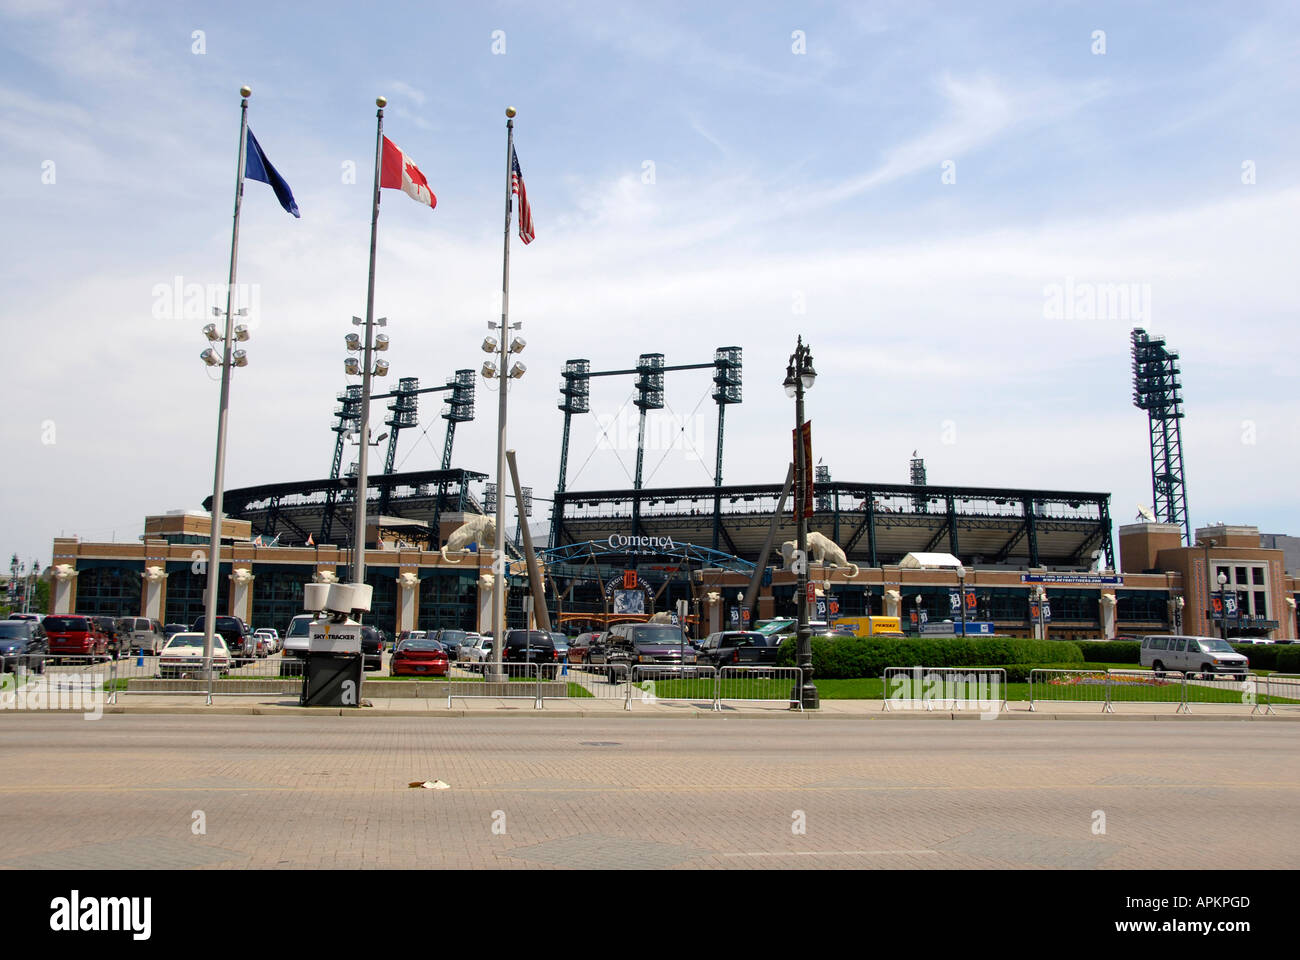 Comerica Ball Park home of the Detroit Tigers professional baseball team Stock Photo